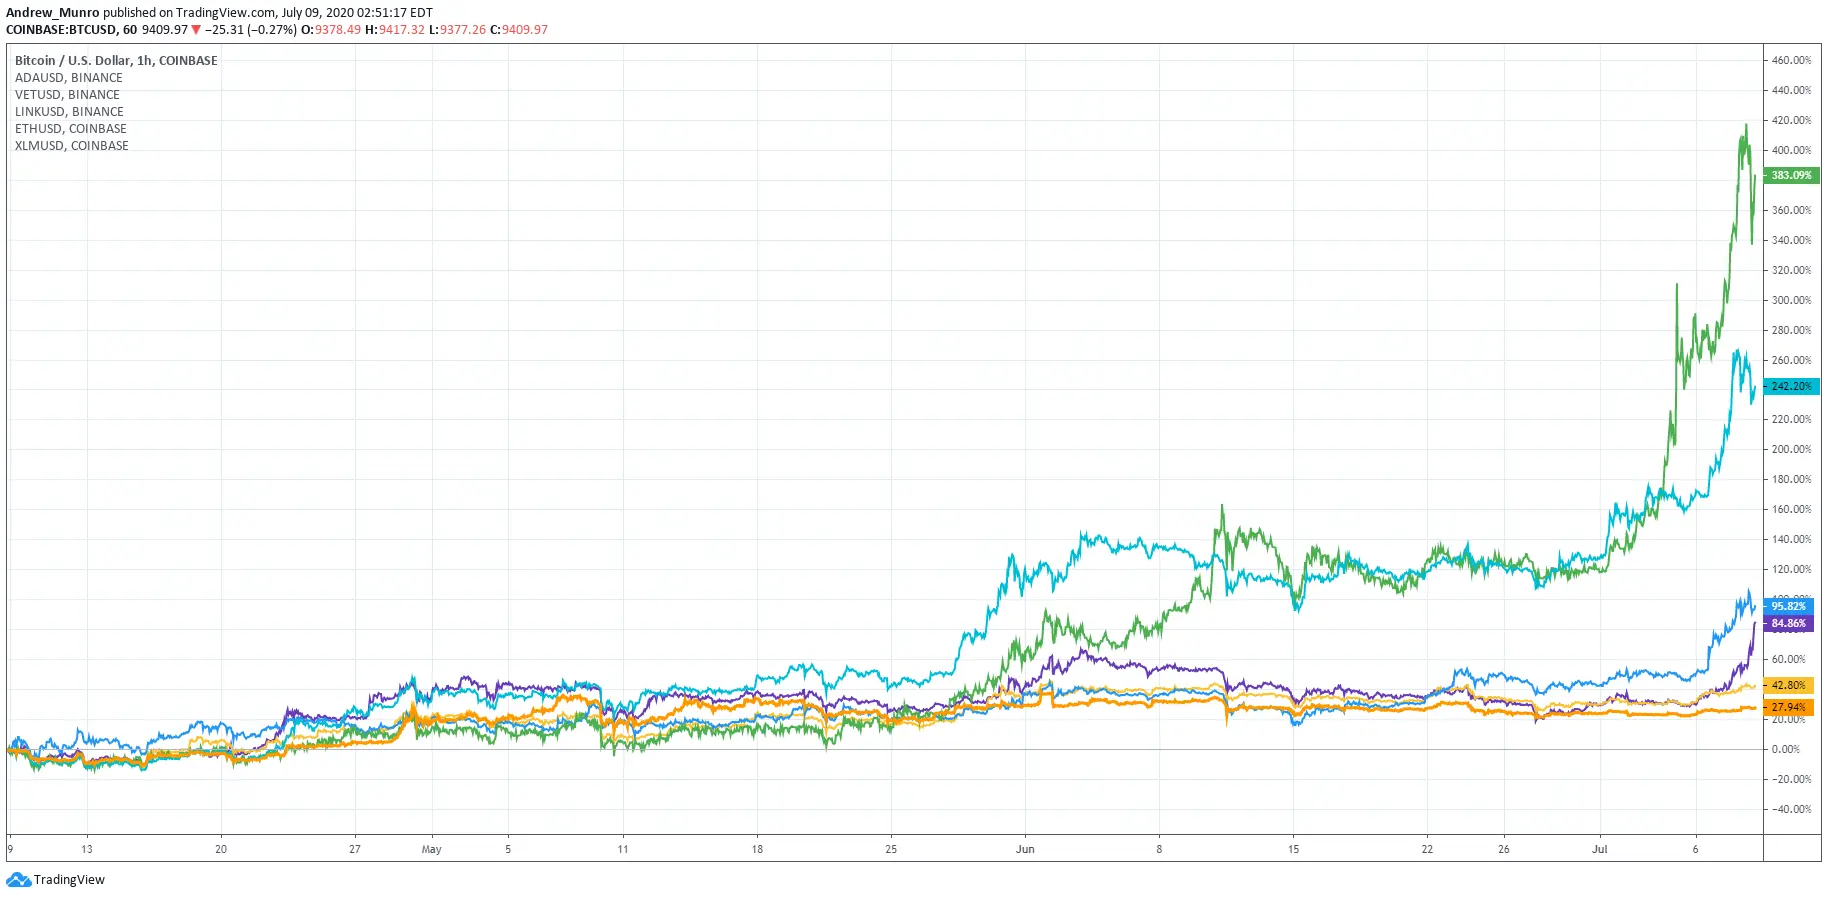 This week's big altcoin moves have been cooking since June ...